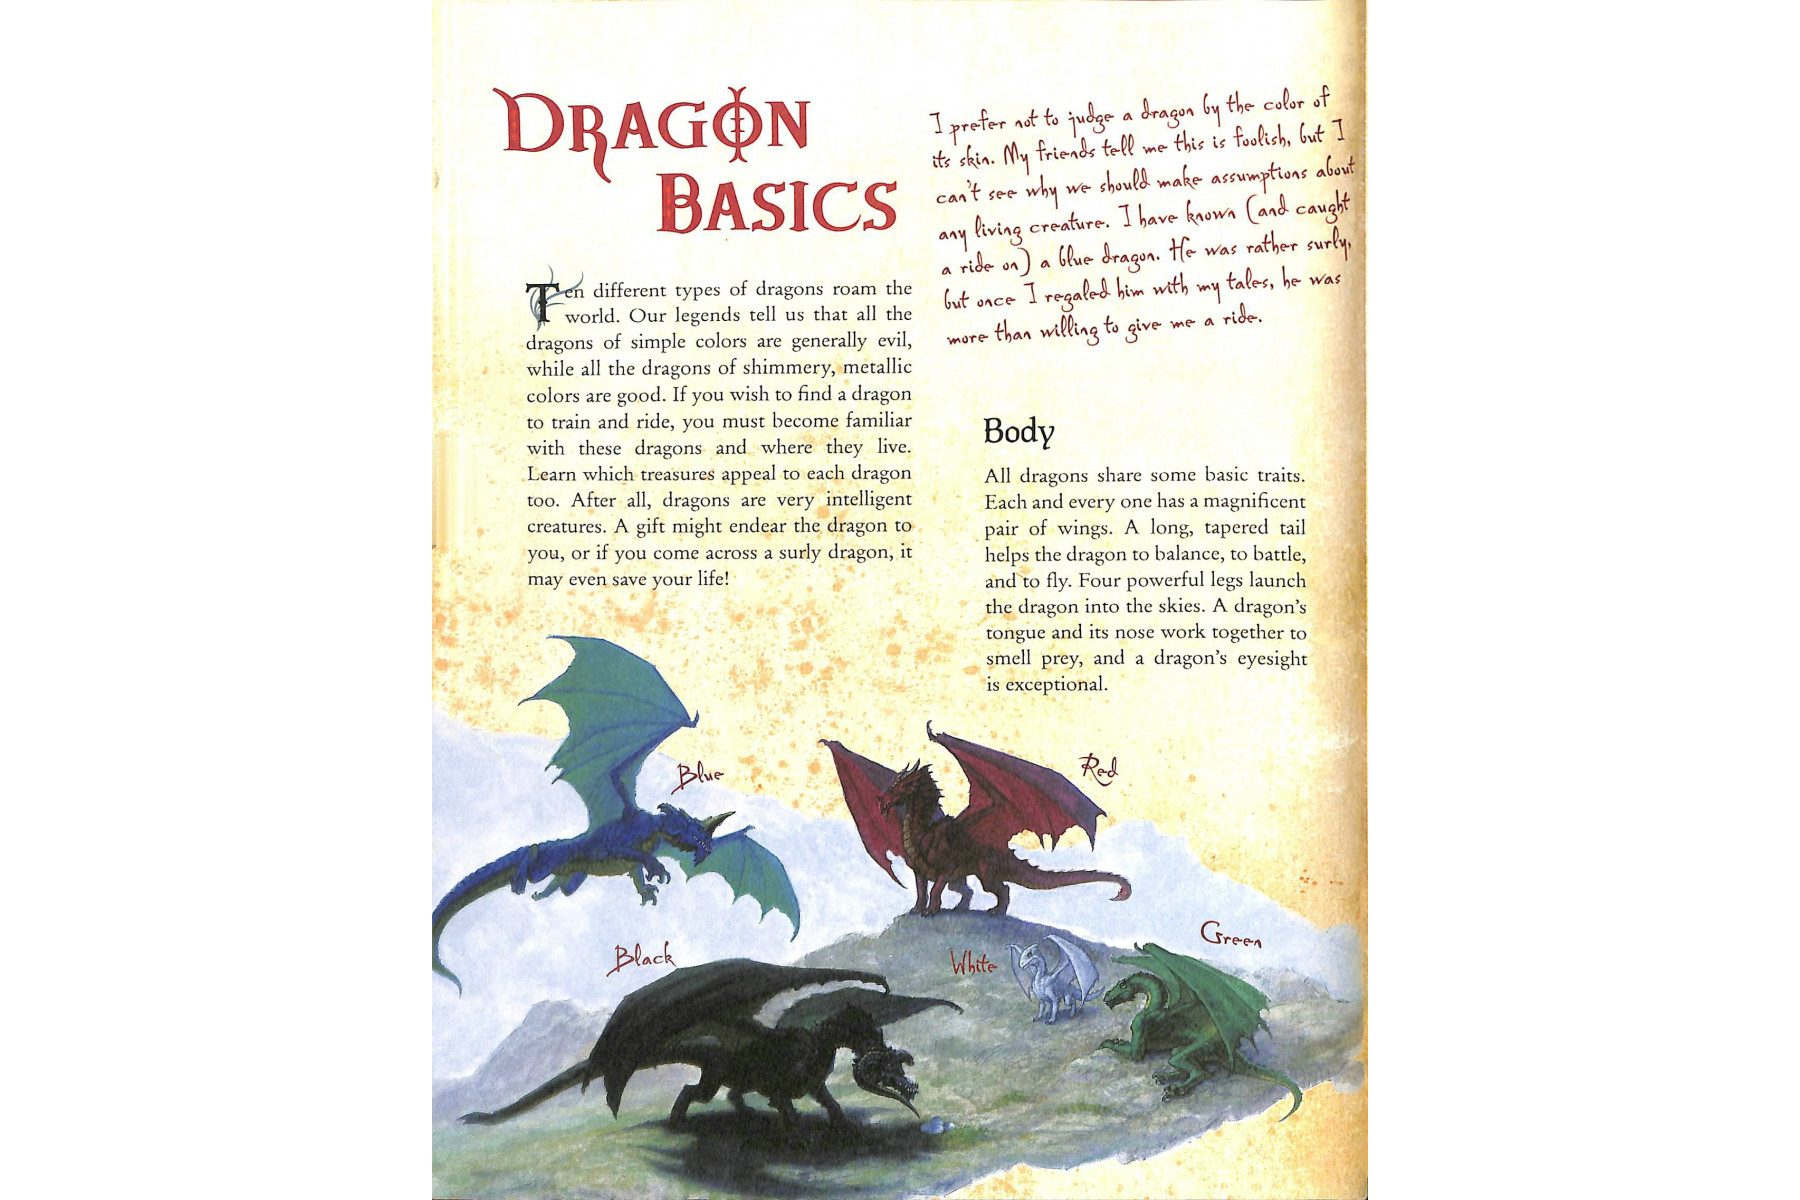 A Practical Guide to Dragon Riding (Dragonlance: the New Adventure)